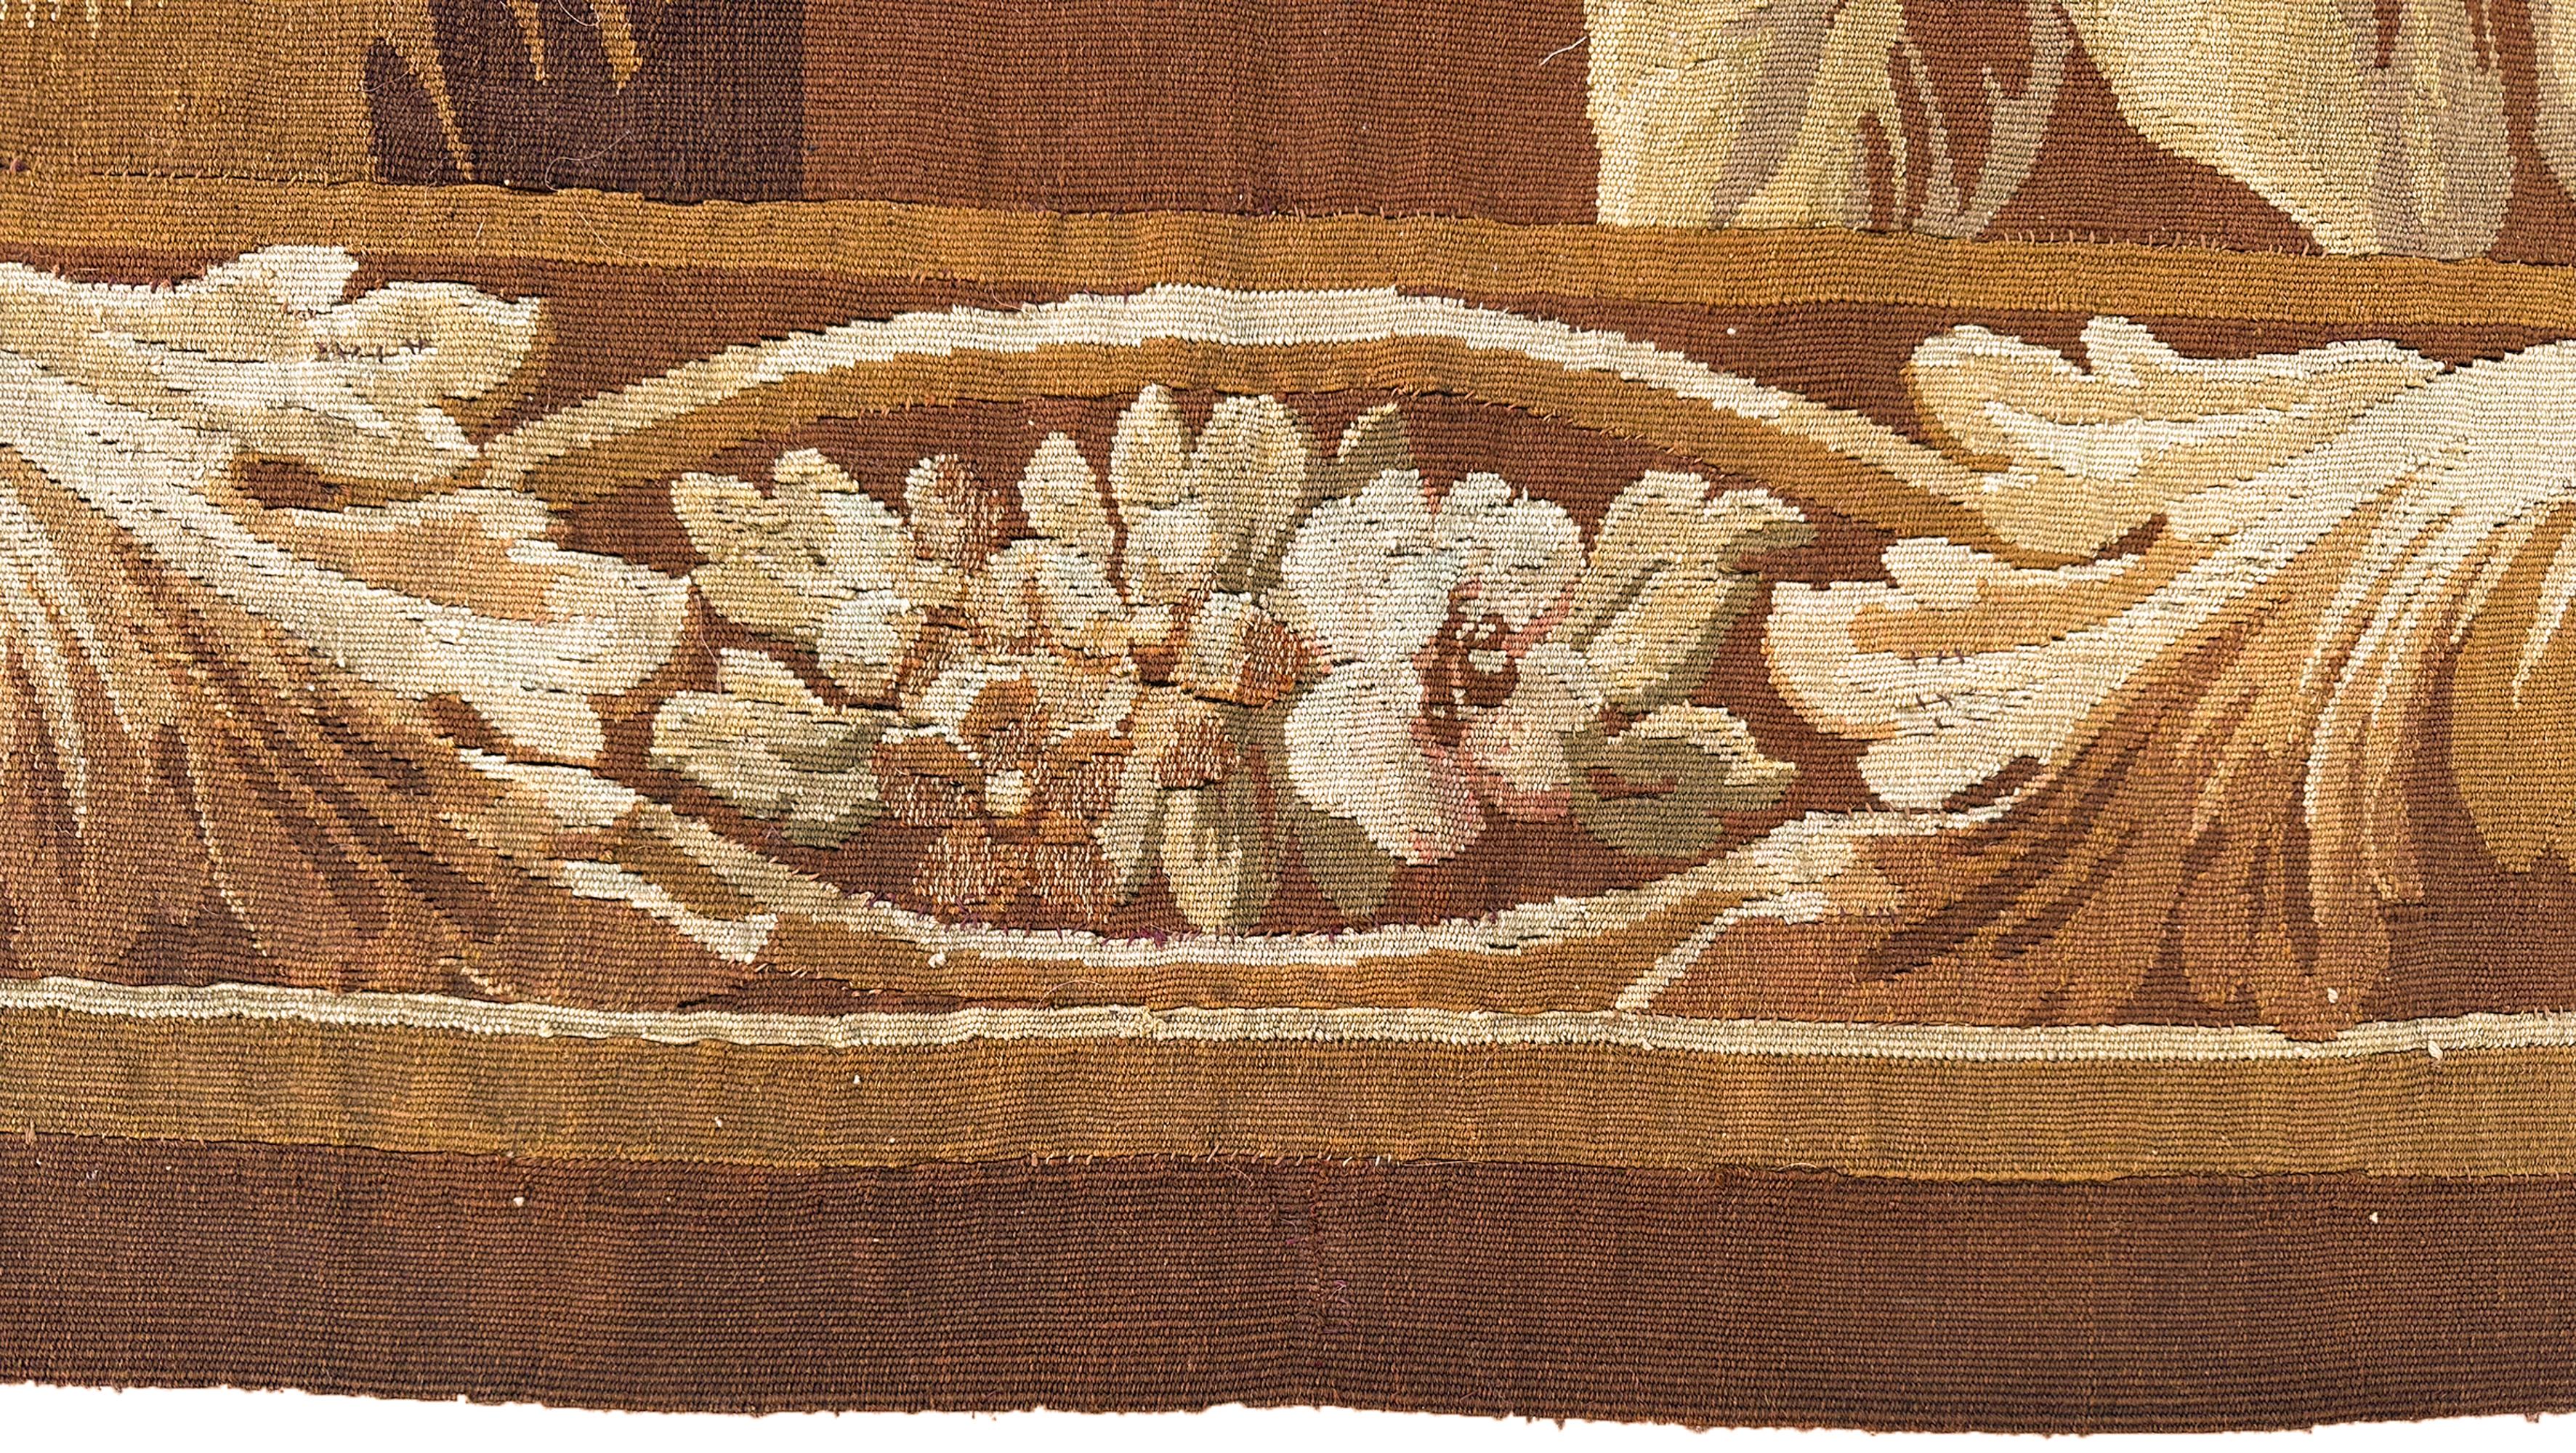 Antique French Aubusson Tapestry Birds Wool & Silk Large 5x9ft 148x280cm 1900 For Sale 3